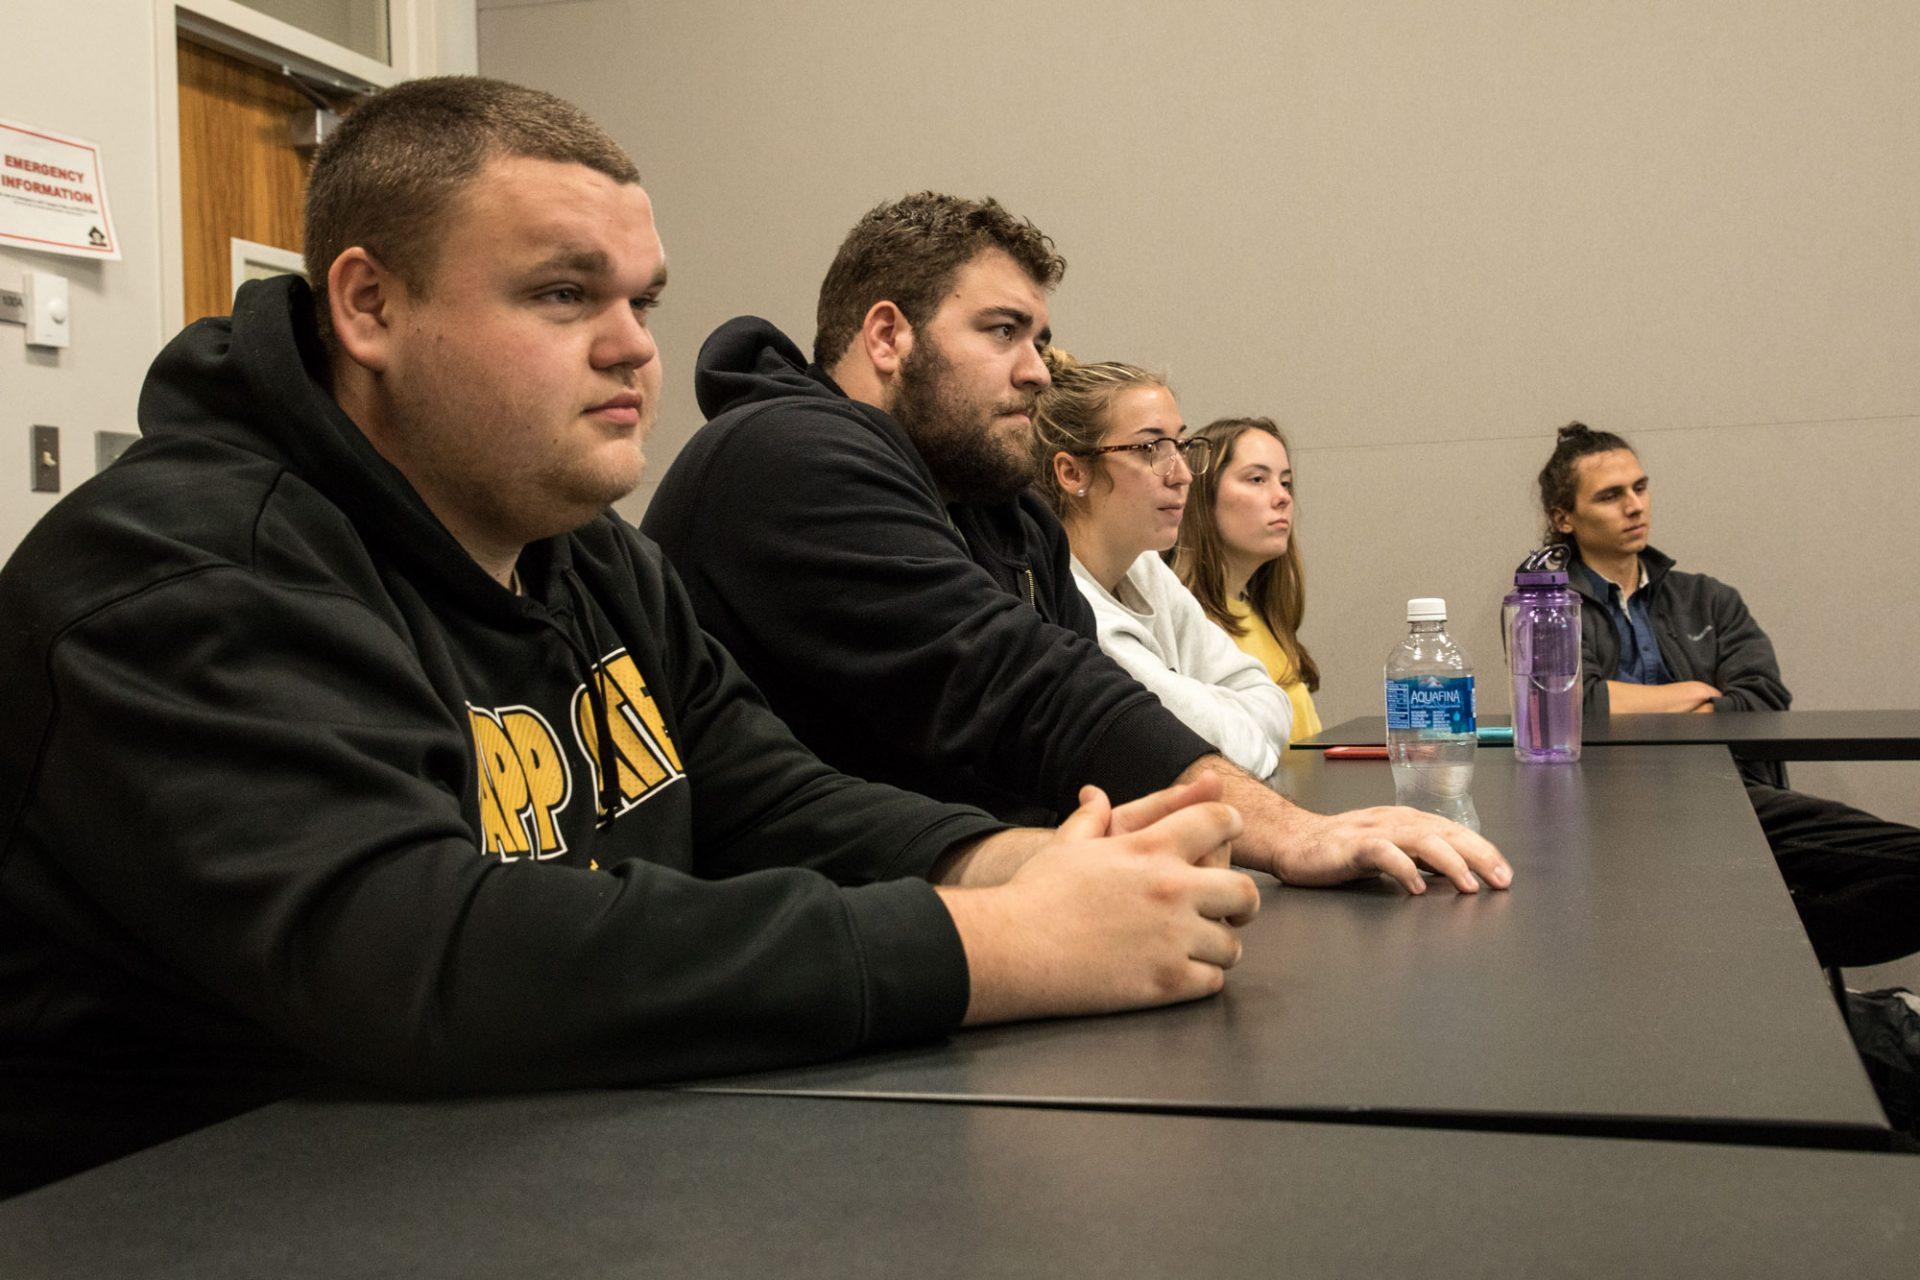 Members of the Appalachian Film Club discuss their goals for the semester on Tuesday, September 12. The meeting was located in New River Room.